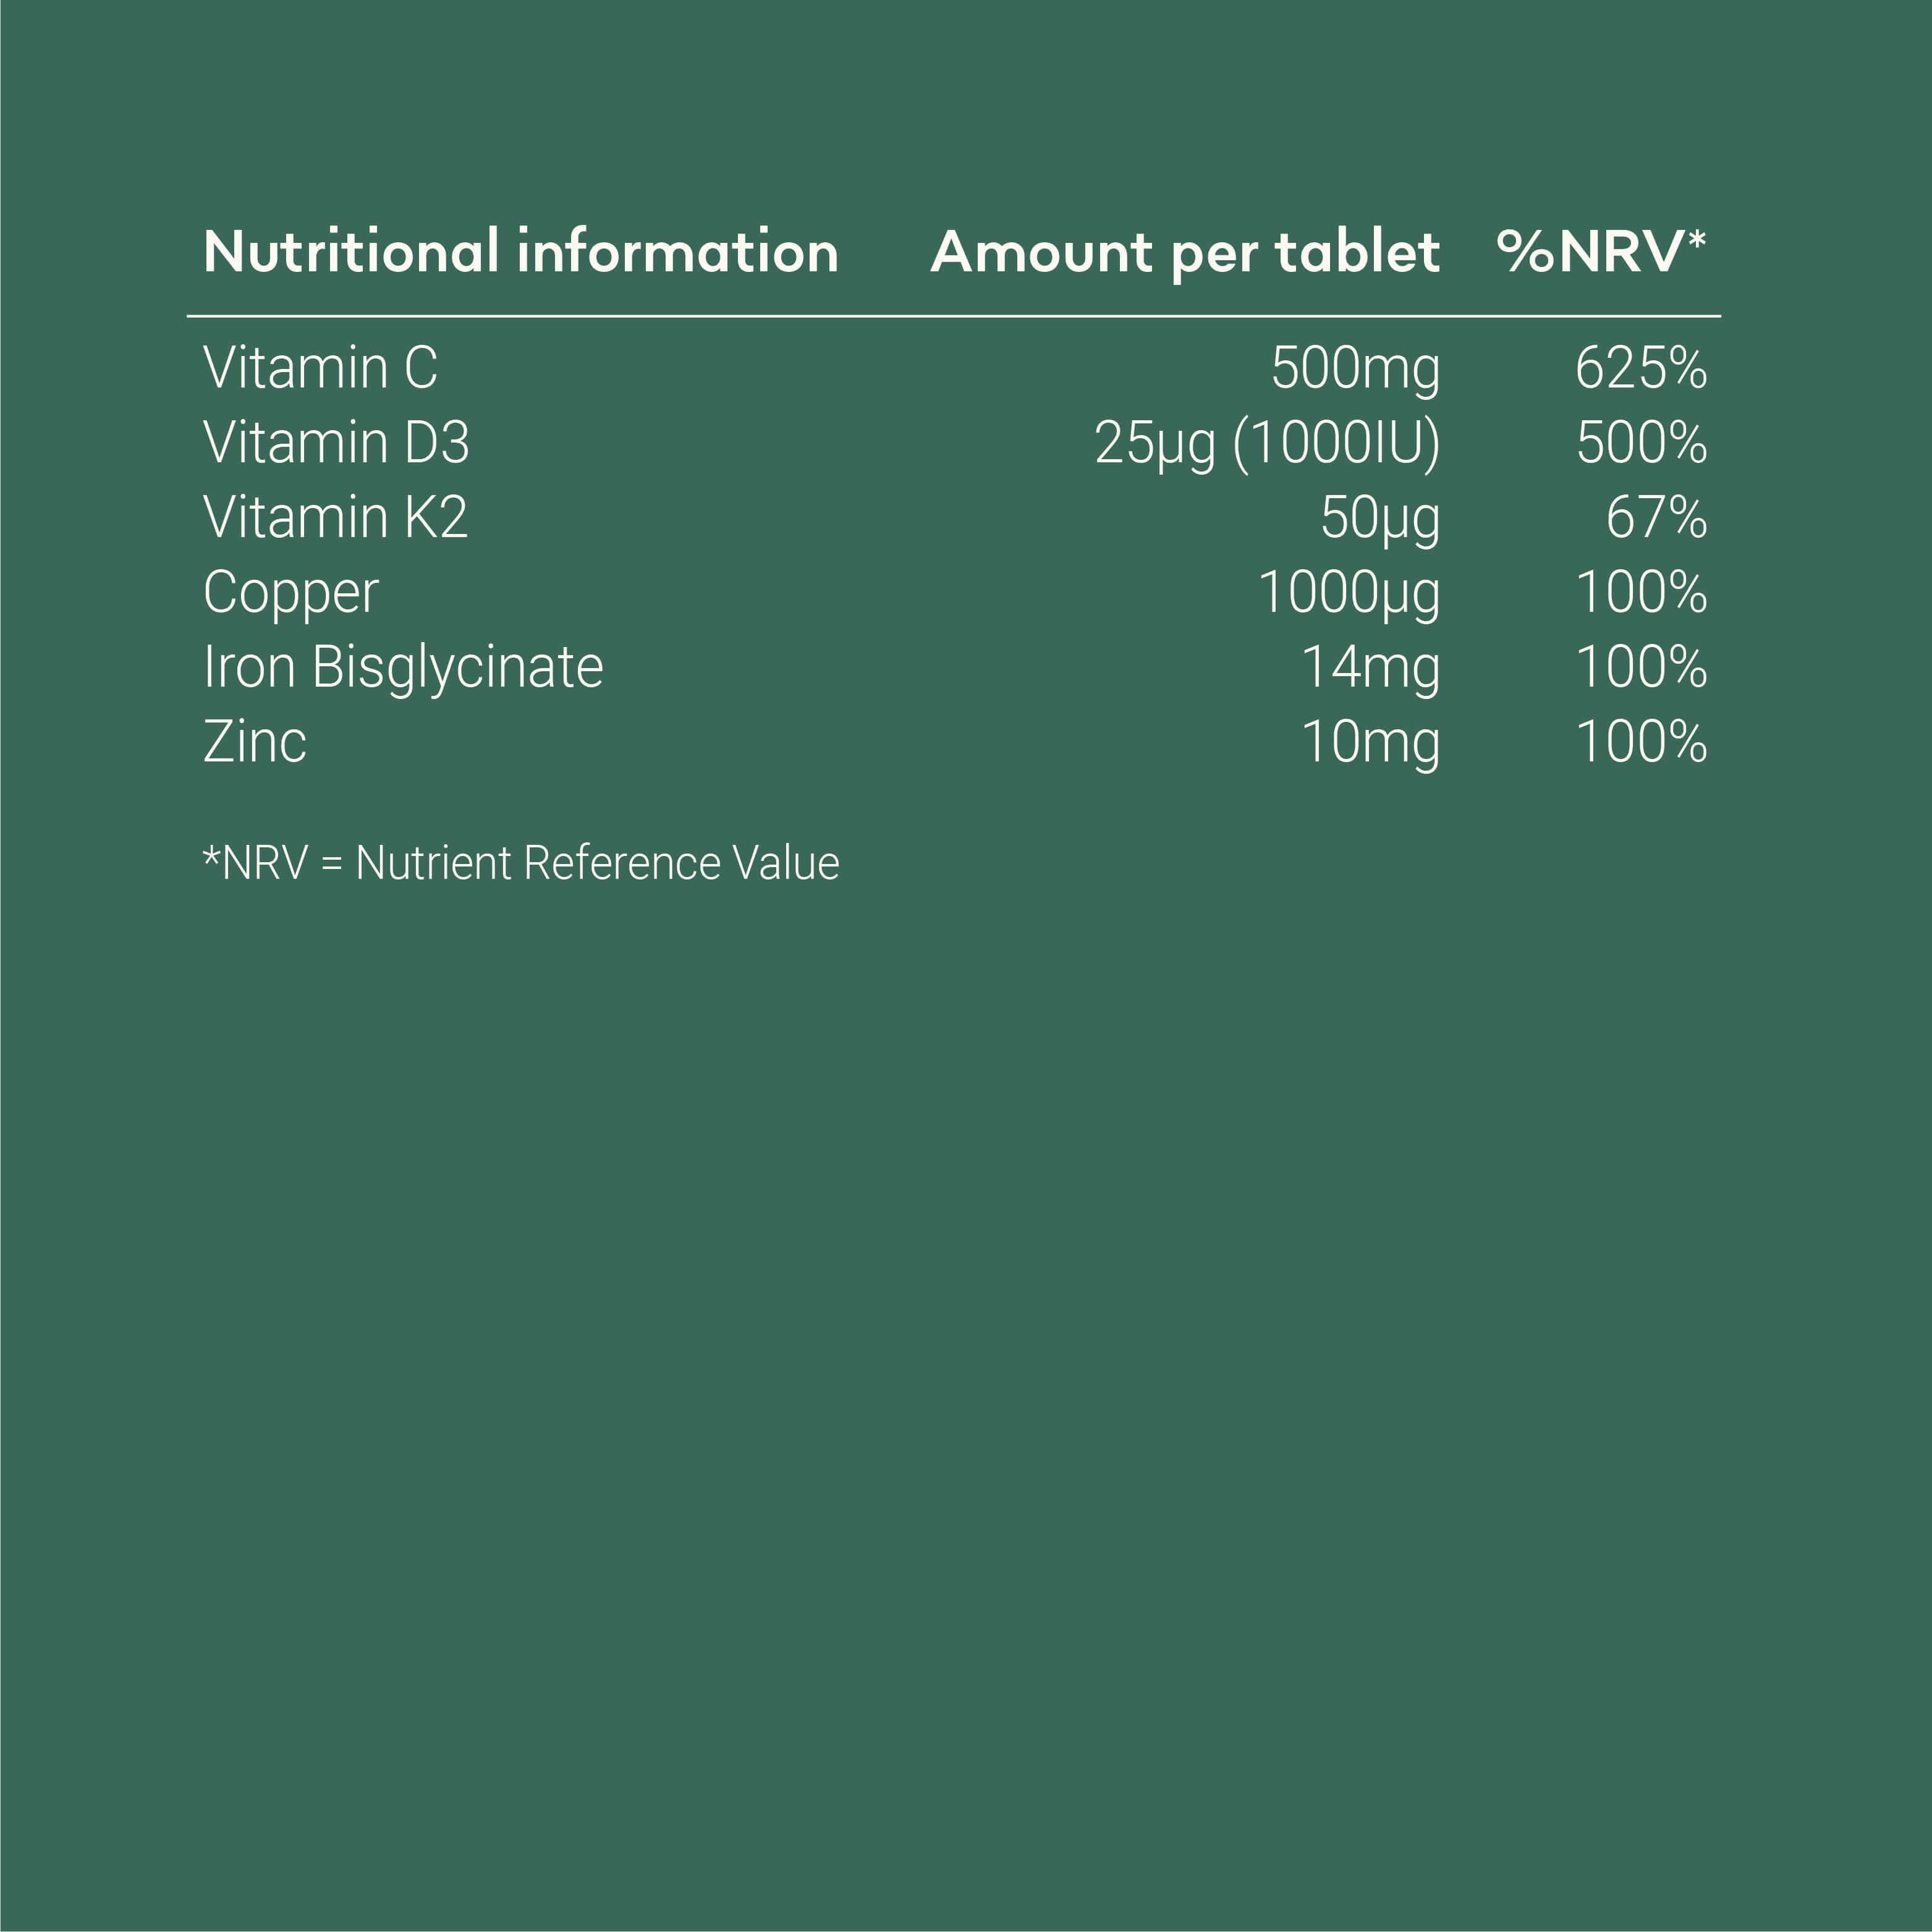 Supplements with Vitamin D3 and K2